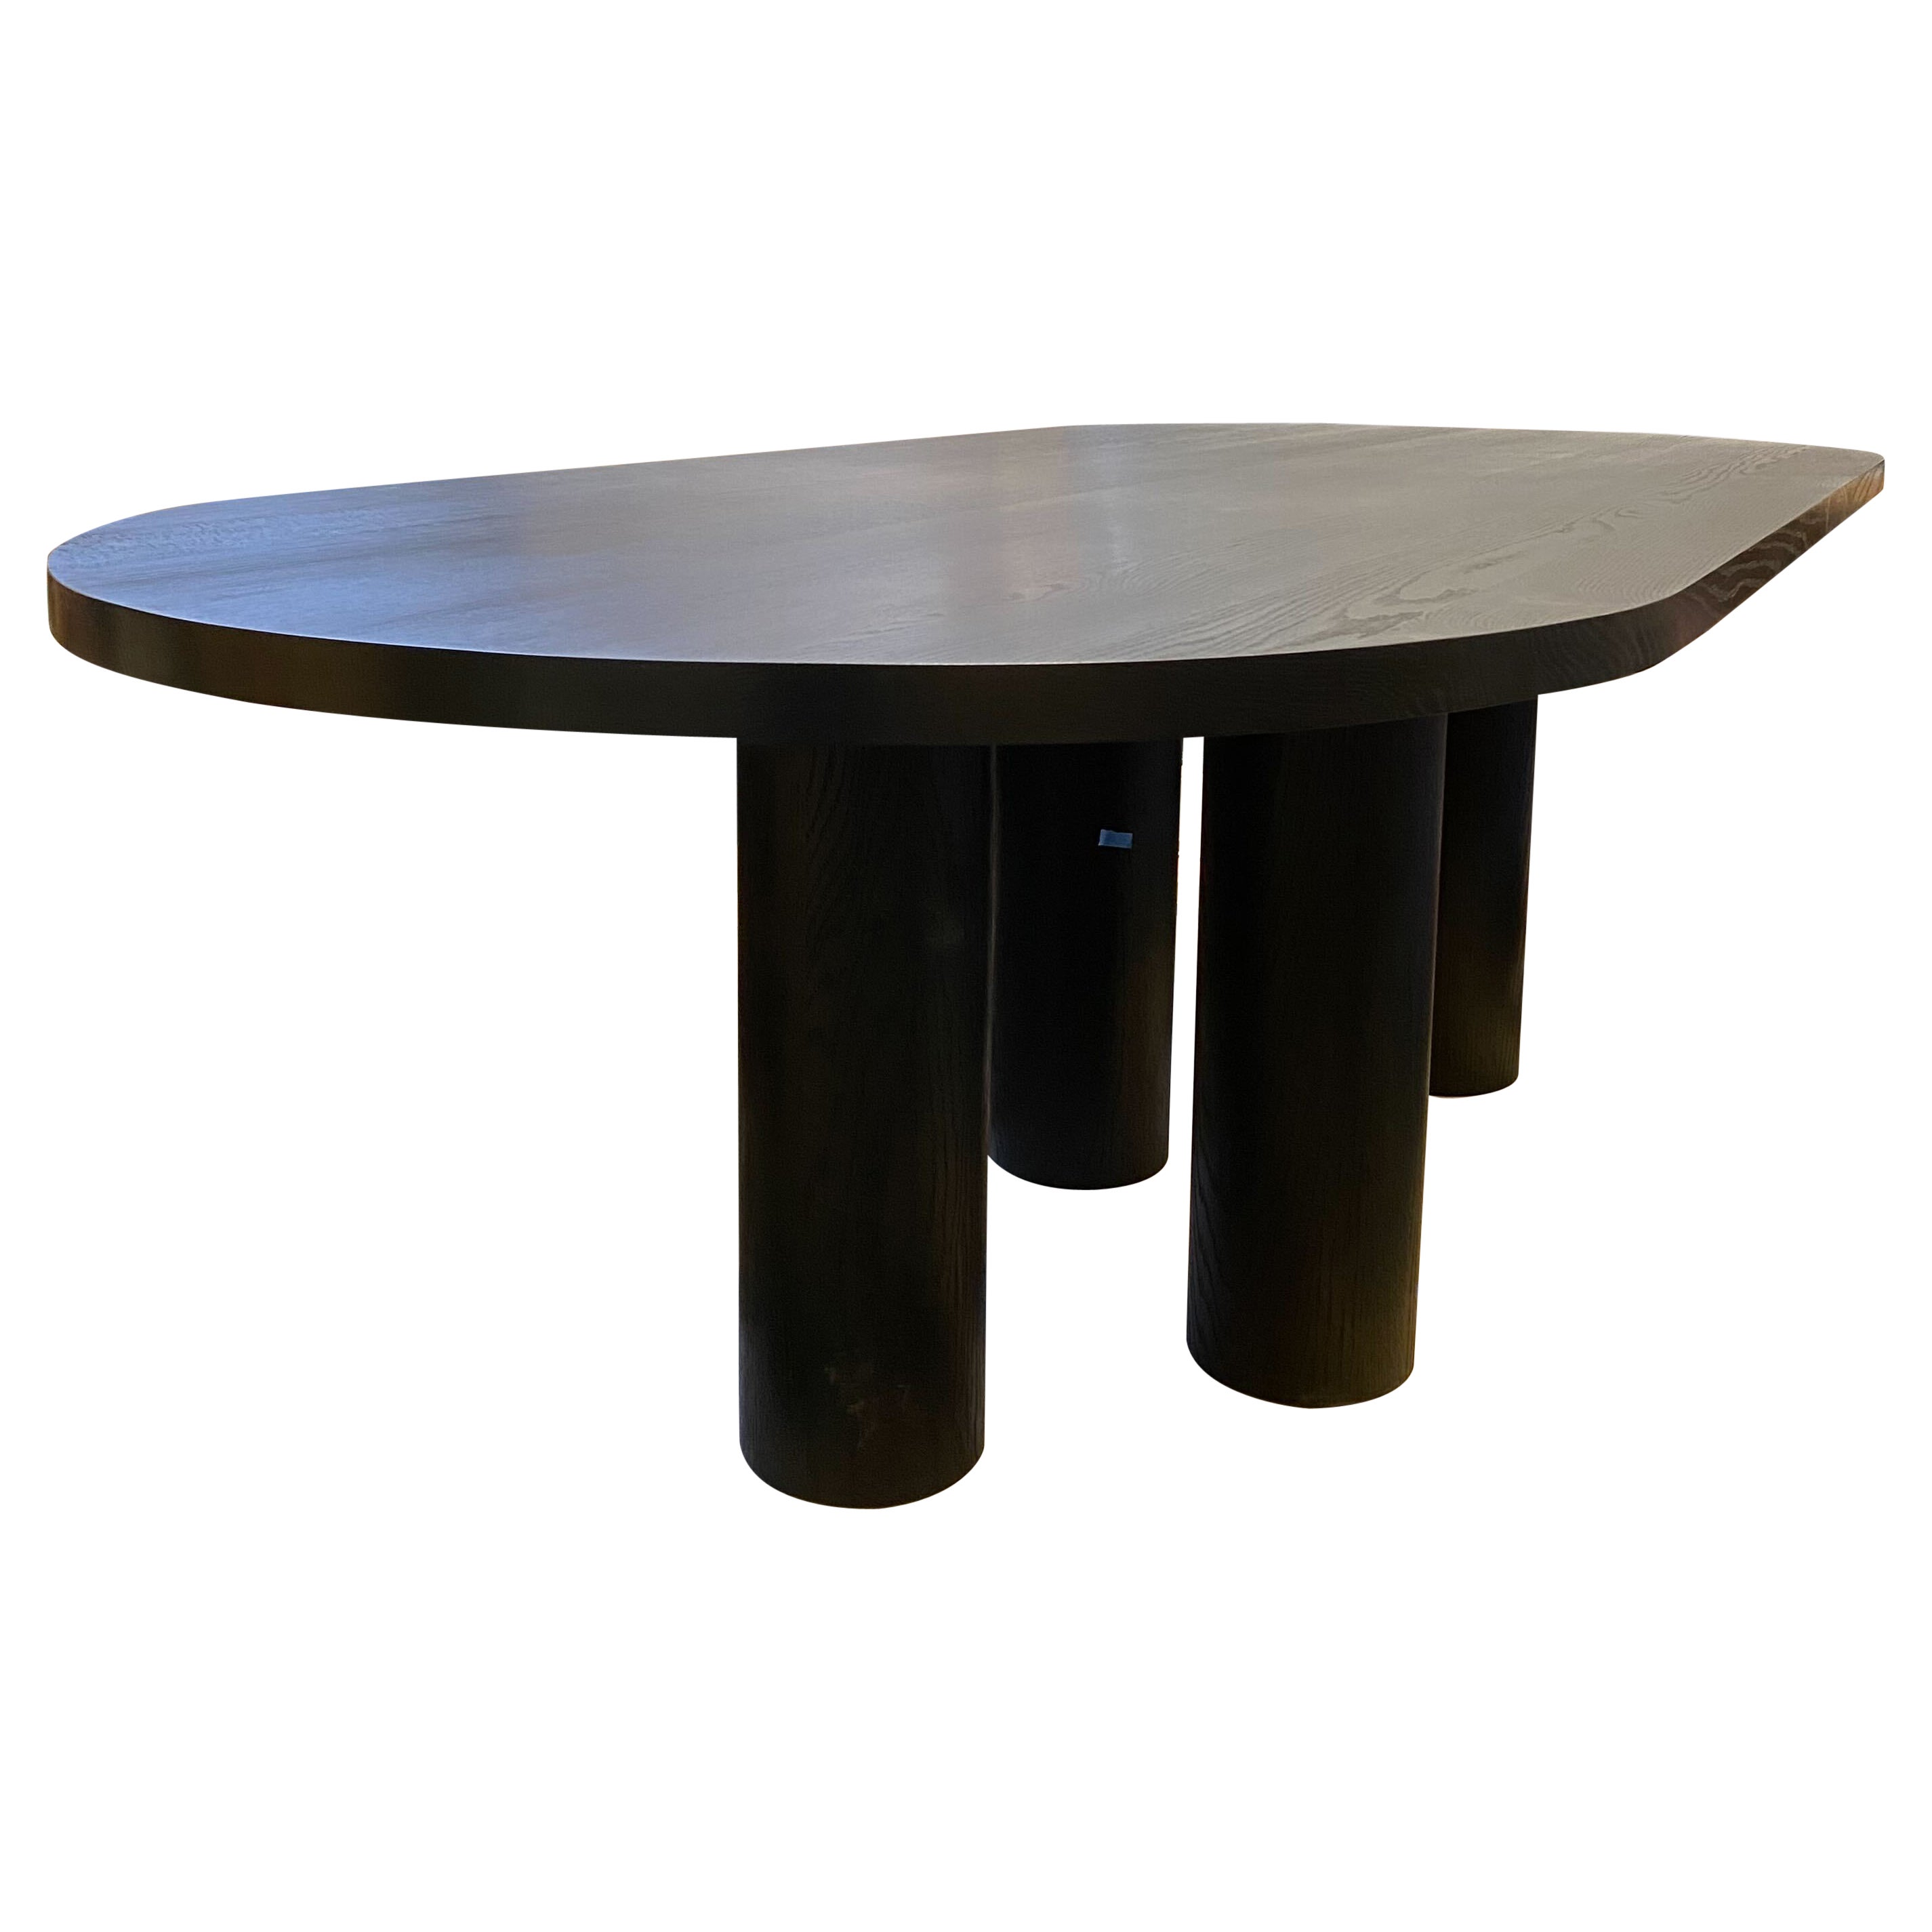 Solid Handcrafted Blackened Oak Eden Table 96"L Mary Ratcliffe Studio